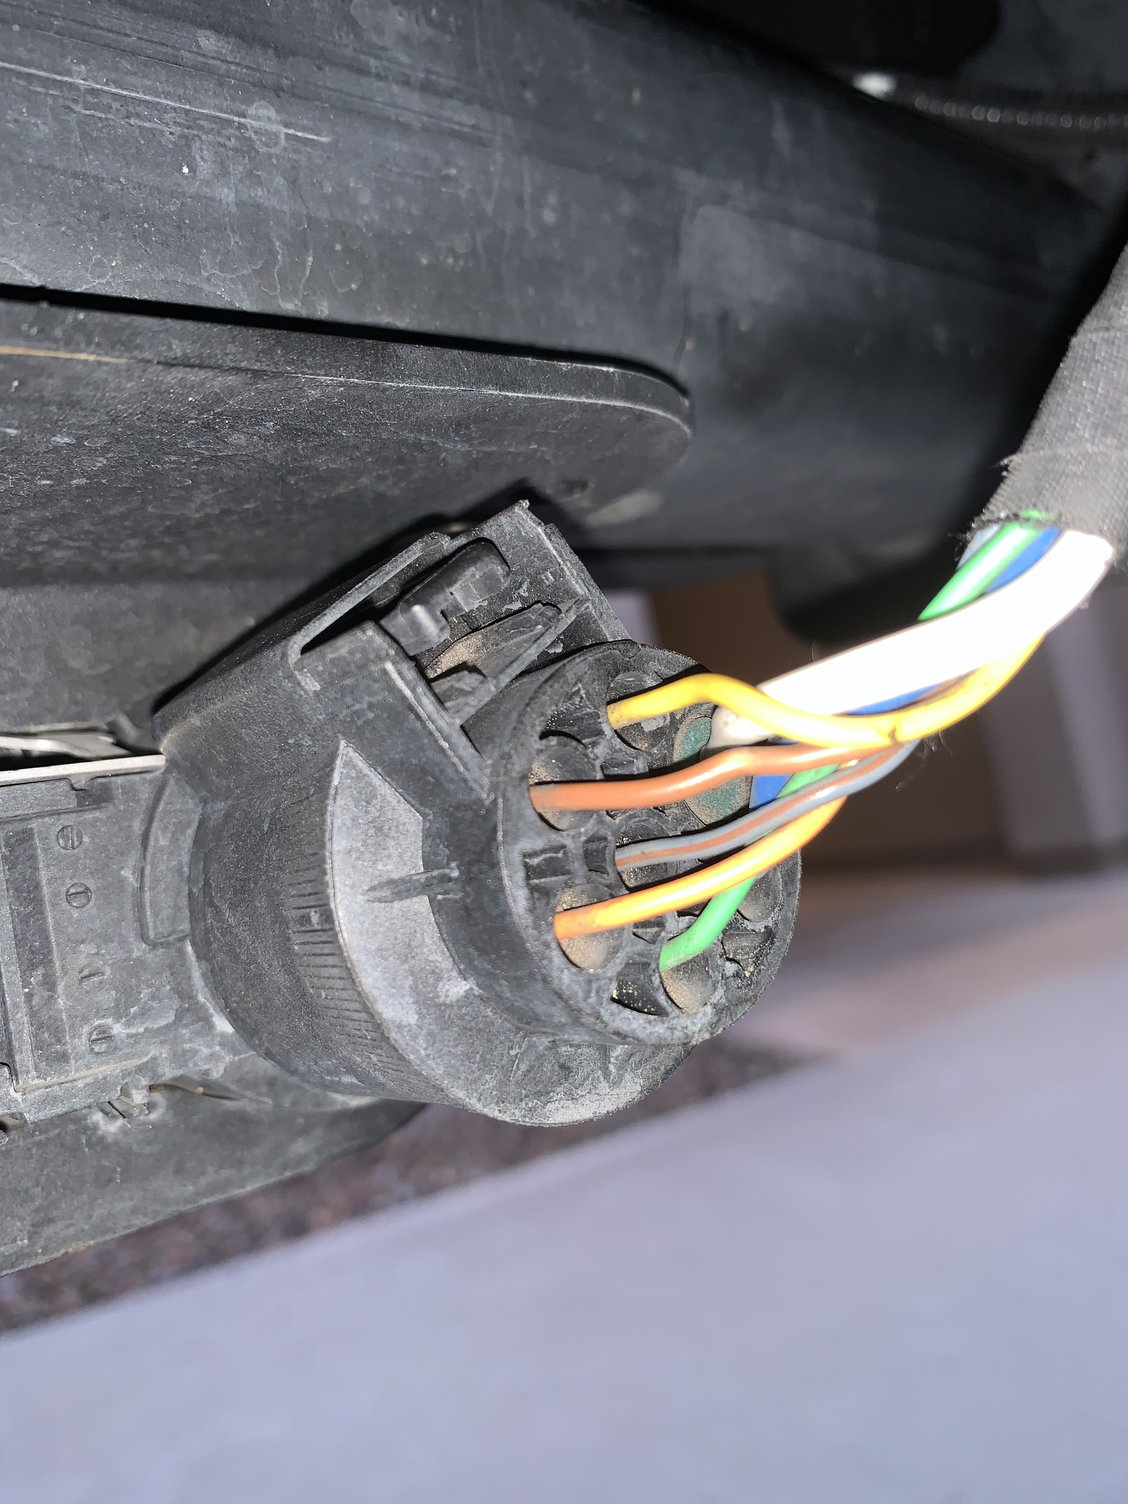 Wiring Harness +12volts / 2016 F150 - Page 3 - Ford F150 Forum